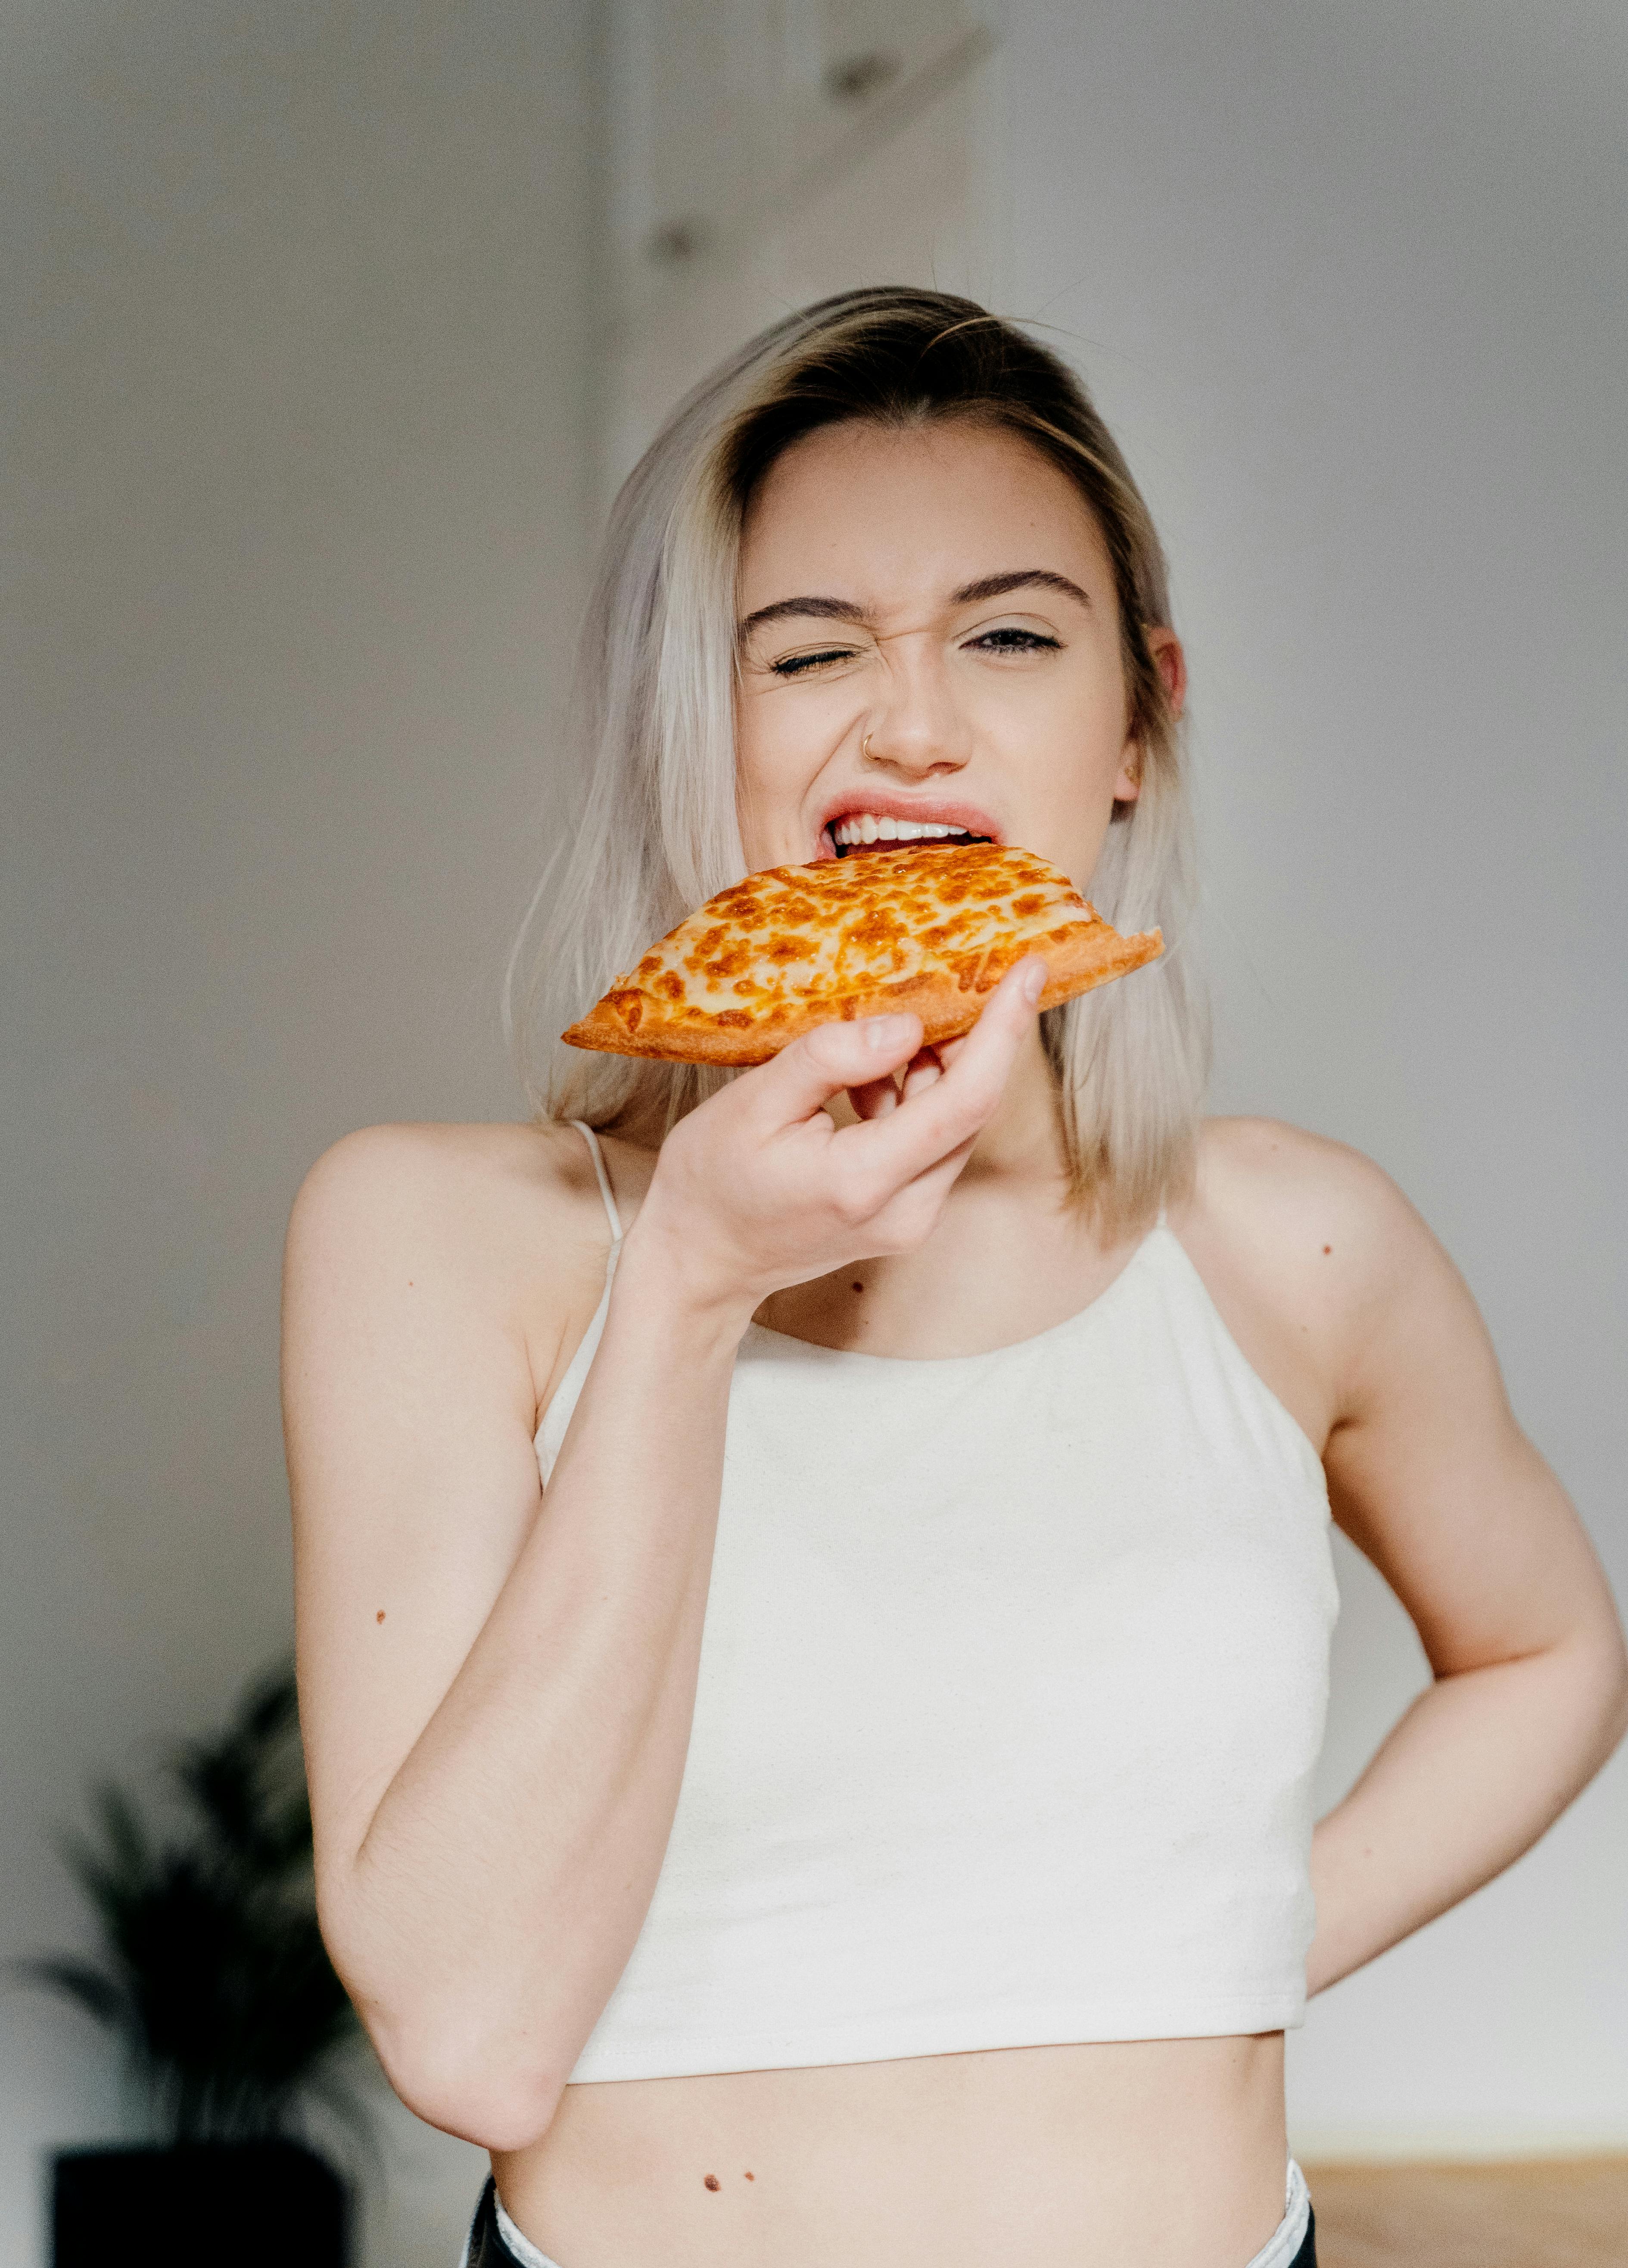 Woman in White Tank Top Holding Pizza · Free Stock Photo